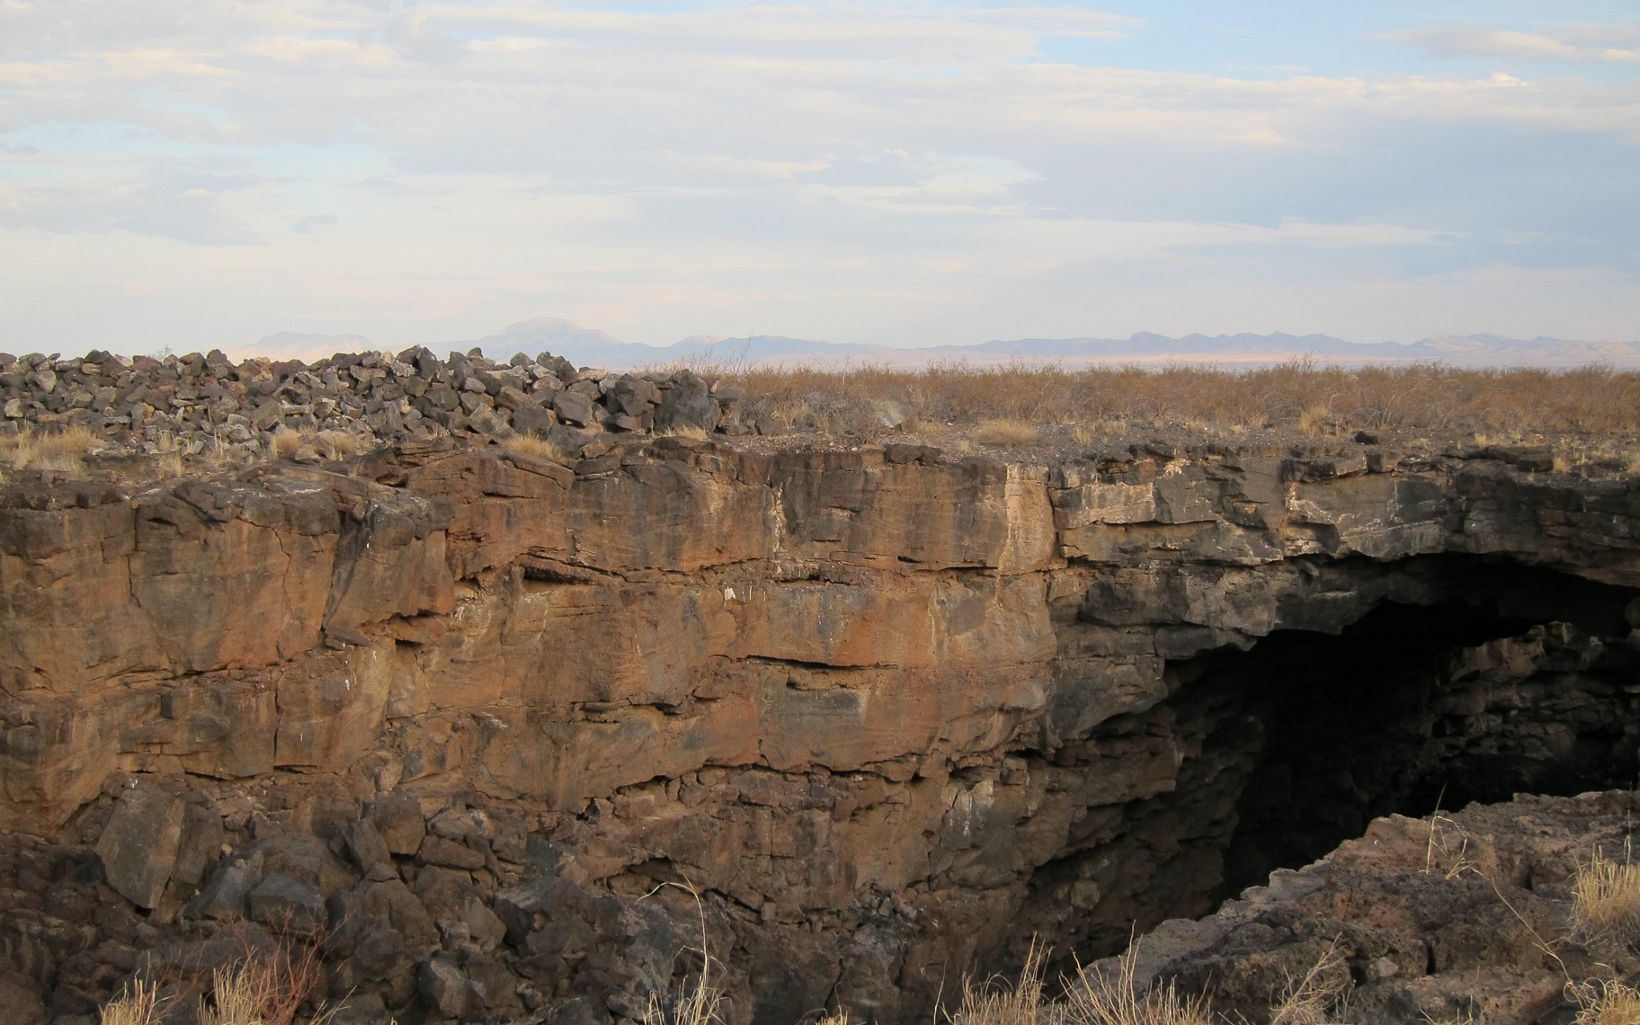 Eight million migratory bats use the Jornada Bat Caves as a stop-over site.